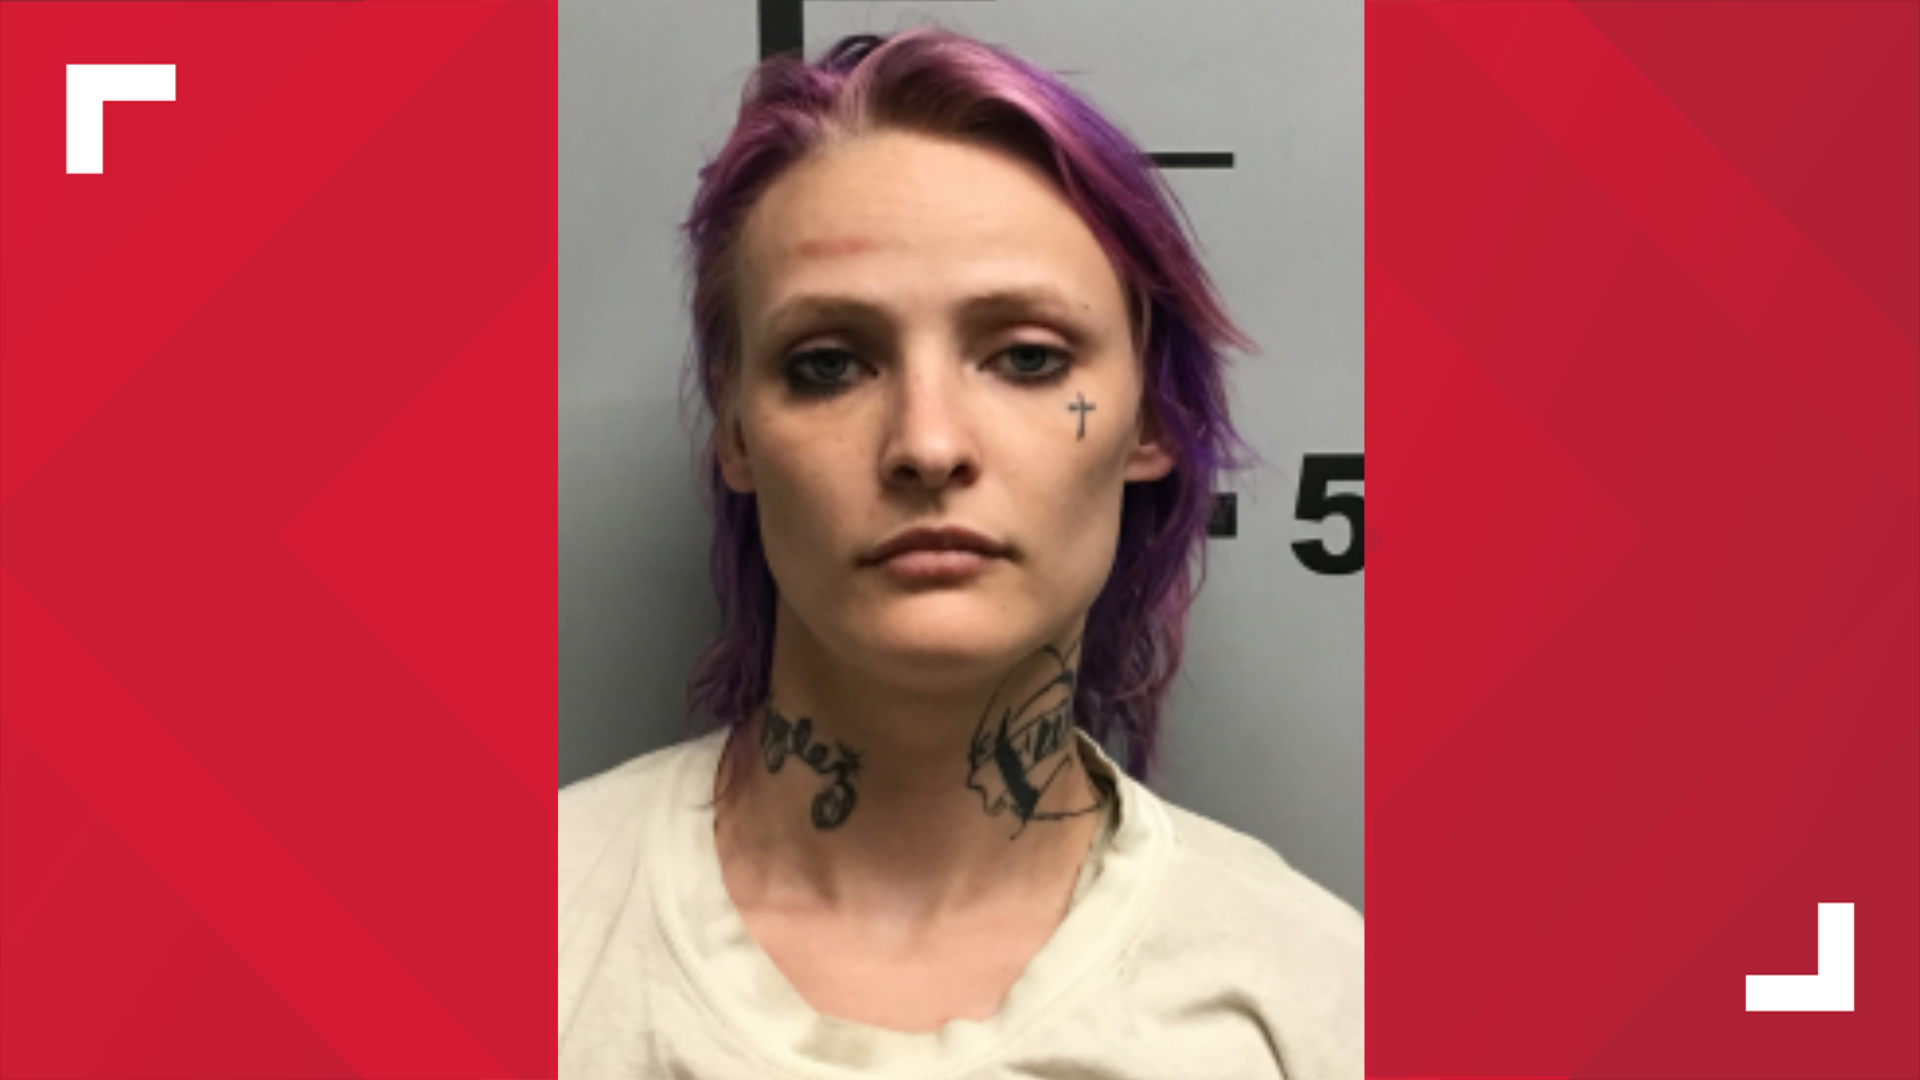 Cash is accused of hitting Pea Ridge officer Kevin Apple with her car and dragging him.